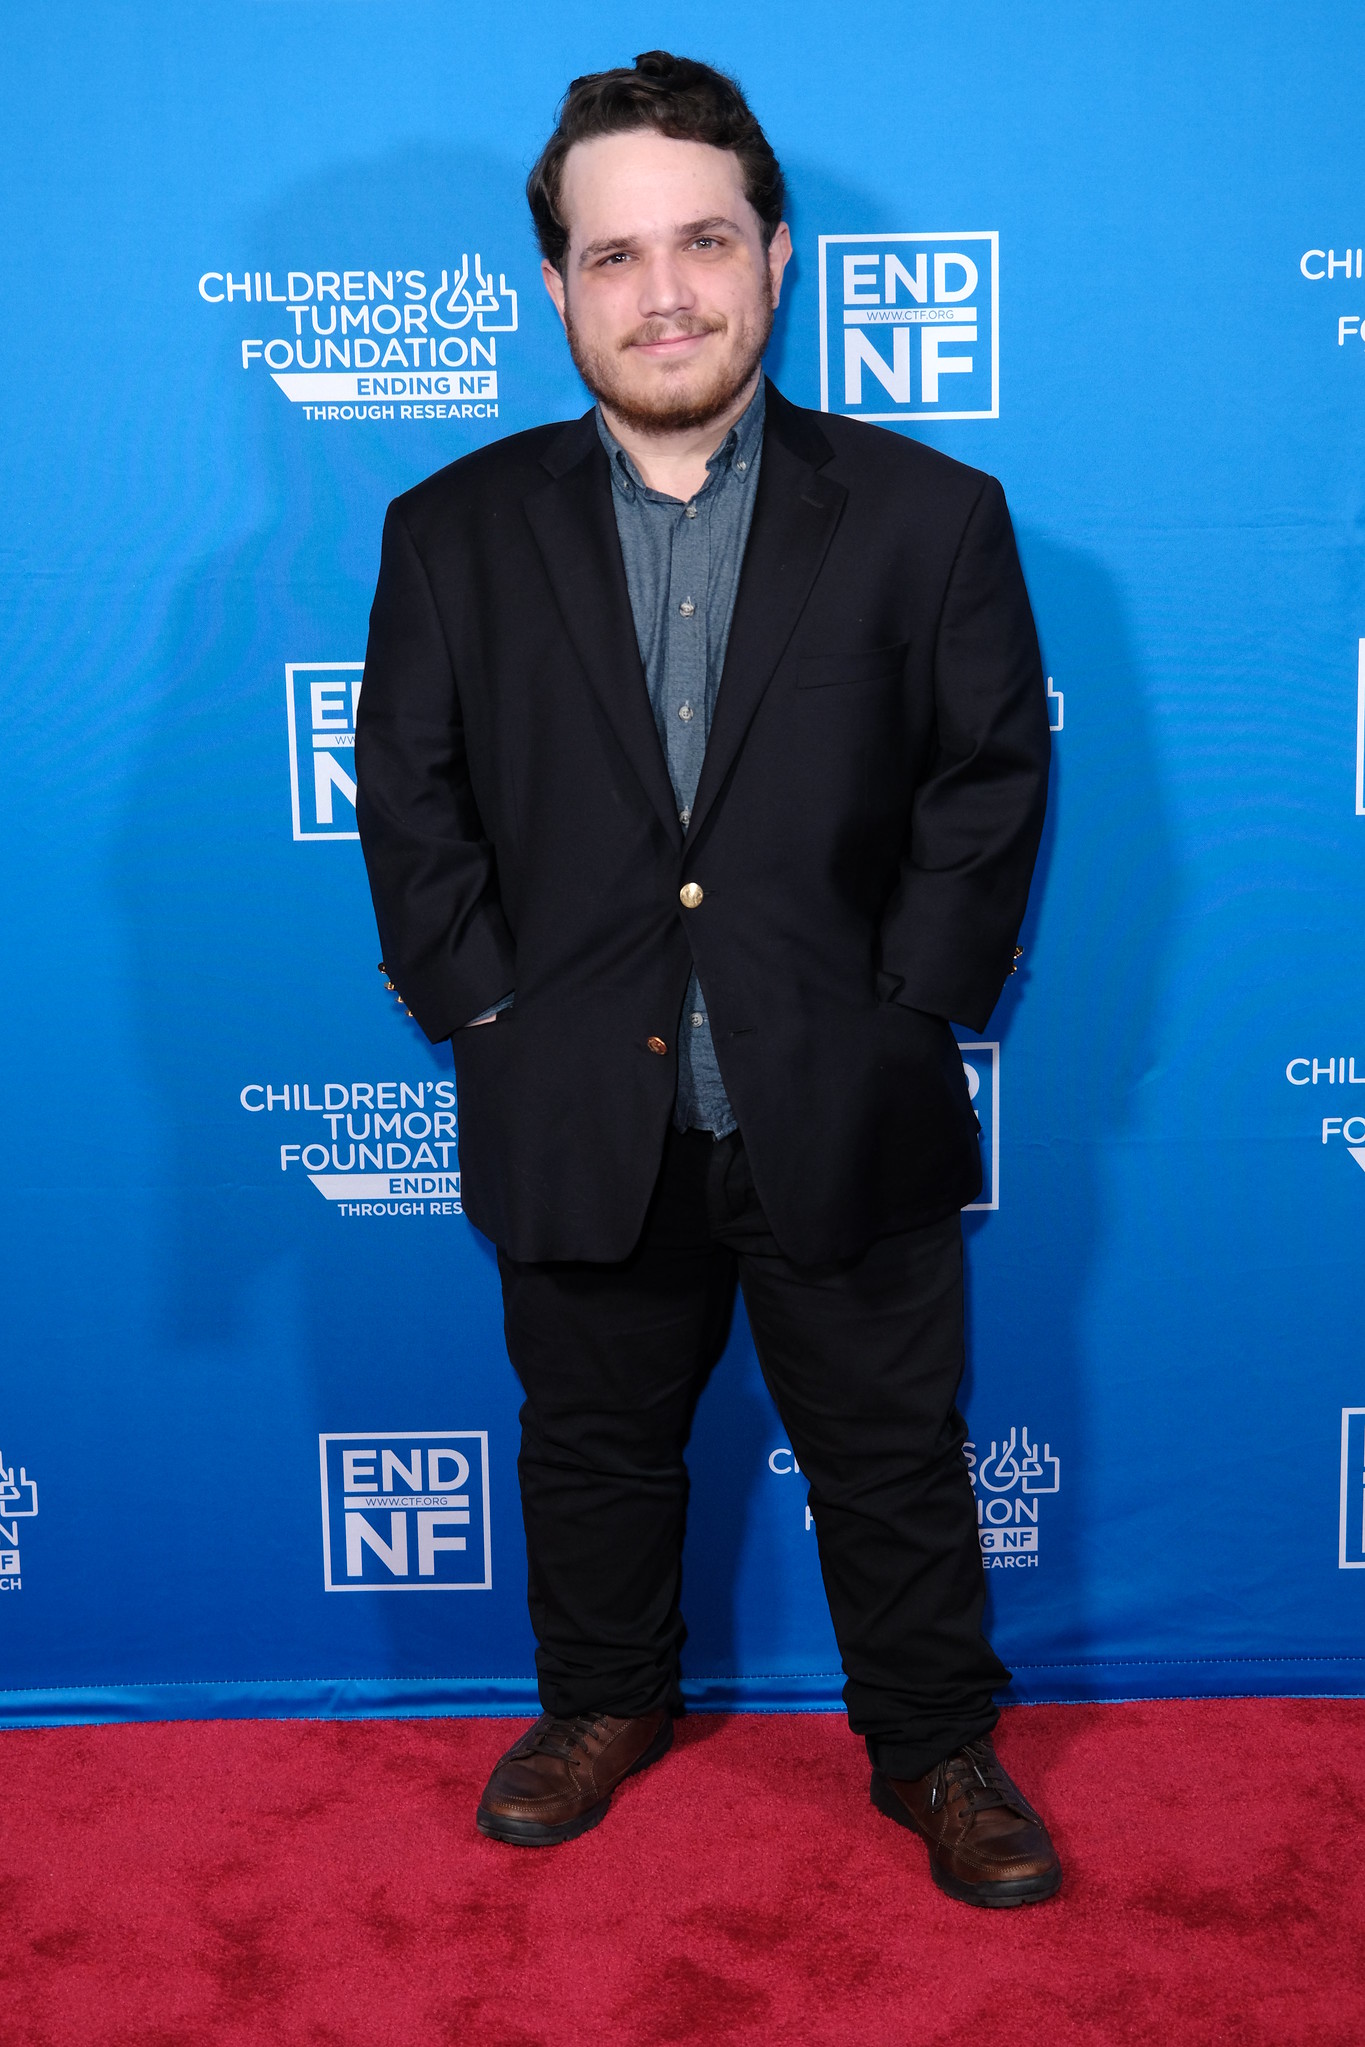 A man in a suit standing on a red carpet.